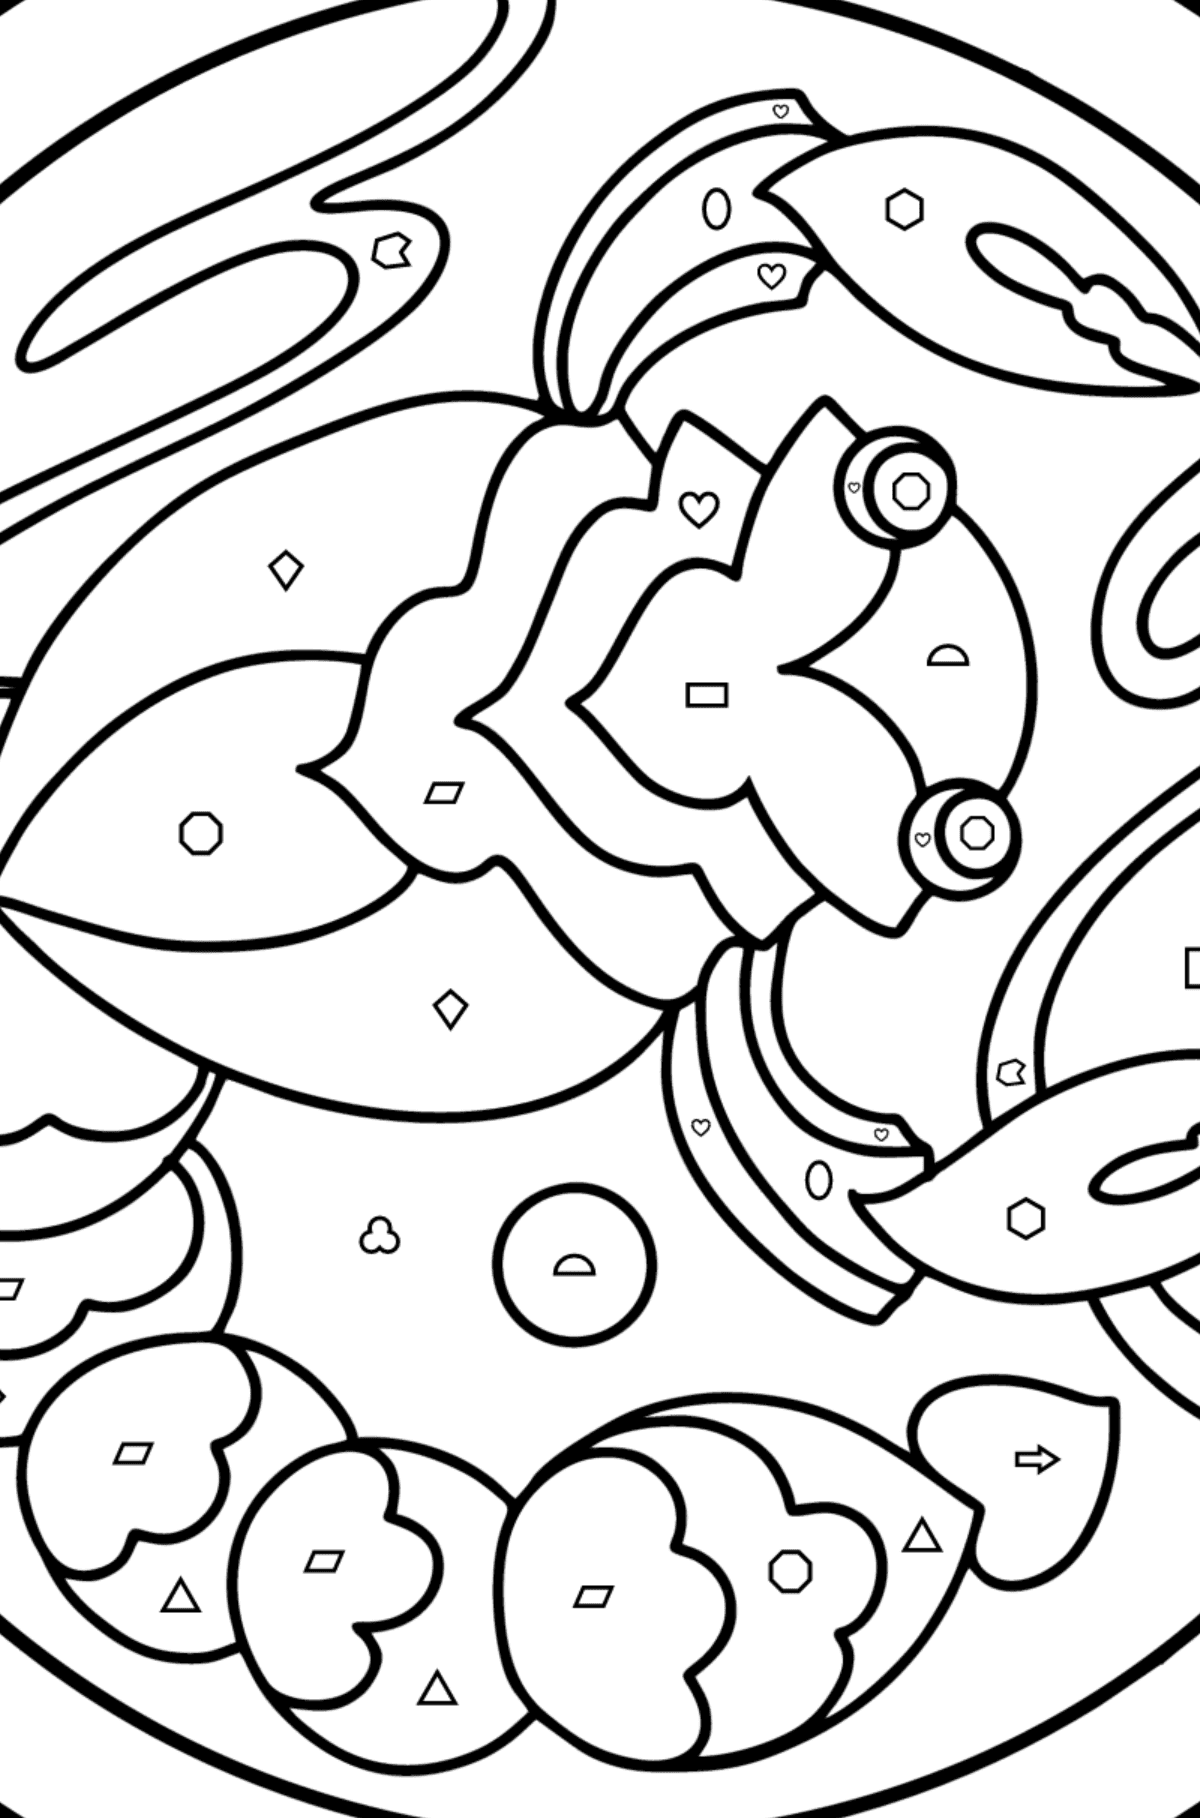 Coloring page for kids - zodiac sign Scorpio - Coloring by Geometric Shapes for Kids